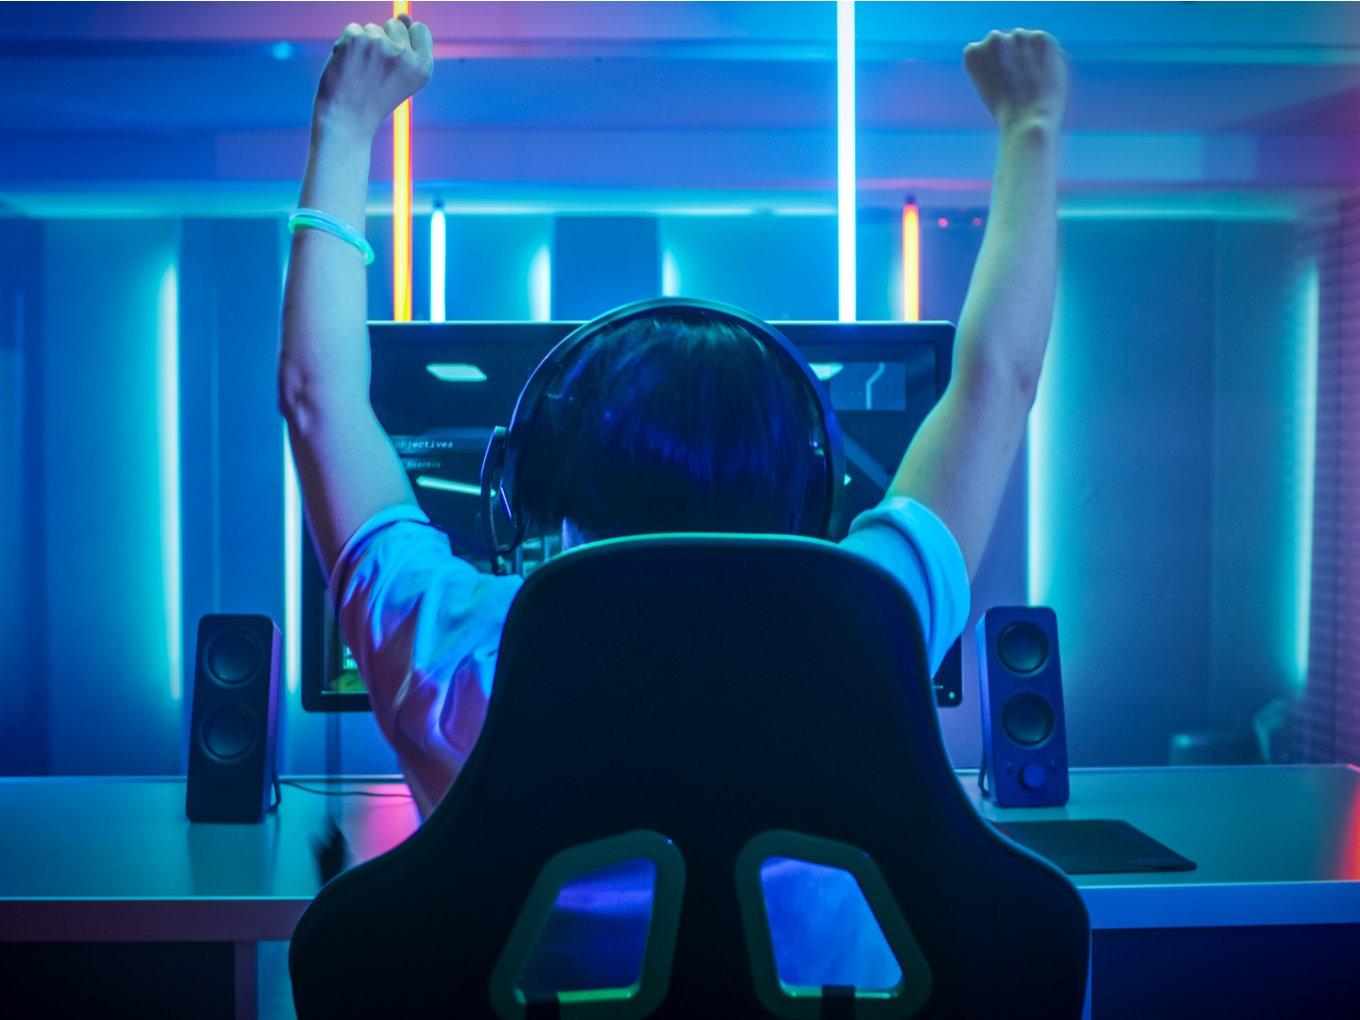 Web3 Gaming Giant YGG’s India Unit IndiGG Bags $6 Mn From Sequoia, Lightspeed IndiGG, Sub-DAO Of YGG, Raises $6 Mn In Seed Funding For Web3 Gaming Summary IndiGG is a sub-DAO of YGG that aims to create a blockchain-powered play-to-earn gaming guild on the Polygon network Gamers earn digital assets like NFTs by participating that can then be sold and exchanged on different marketplaces According to Reddit cofounder Alexis Ohanian, who invested in IndiGG, 90% of the games in the market will be play-to-earn games in the next five years Web3 gaming startup IndiGG has raised $6 Mn in seed funding from Sequoia Capital India, Lightspeed Venture Partners, Variant Fund, Play Ventures Dune Ventures and Jump Capital among others.